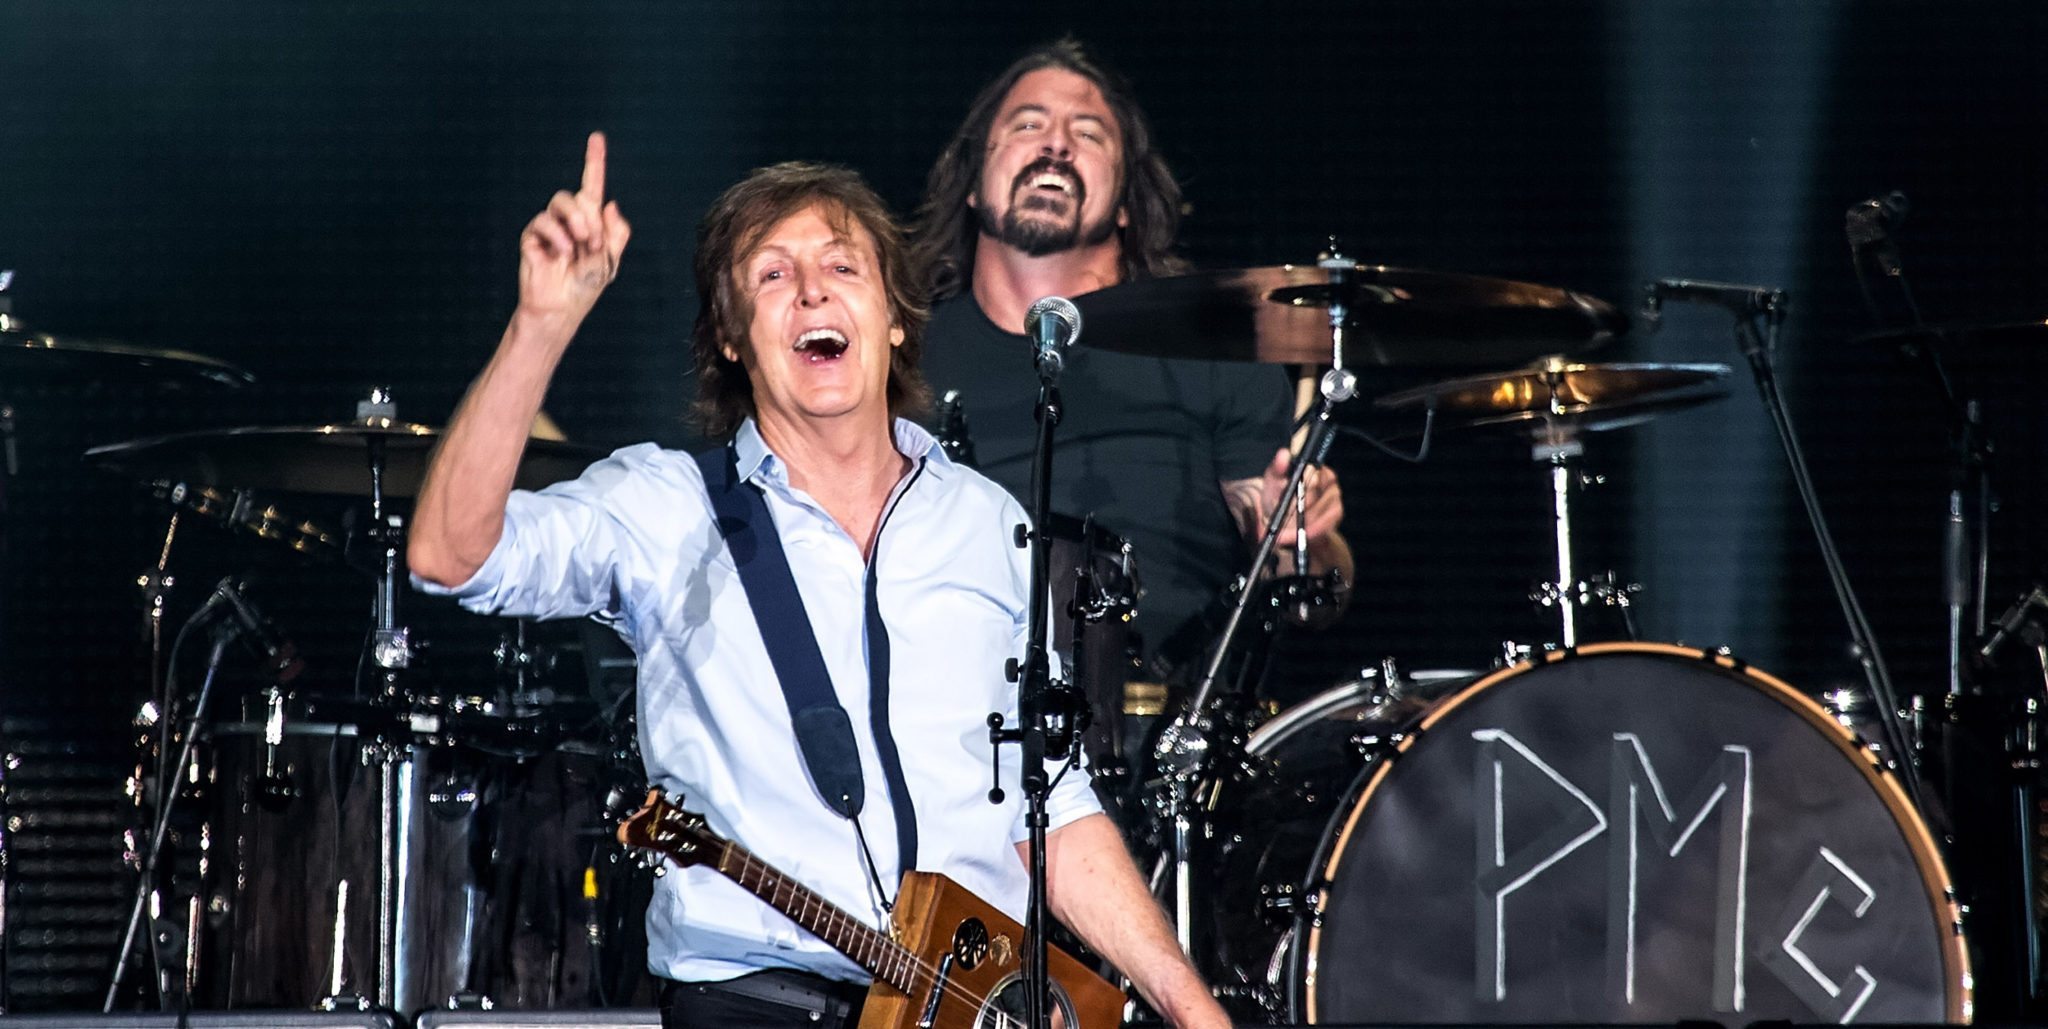 Paul McCartney and Dave Grohl Perform In Concert At Safeco Field